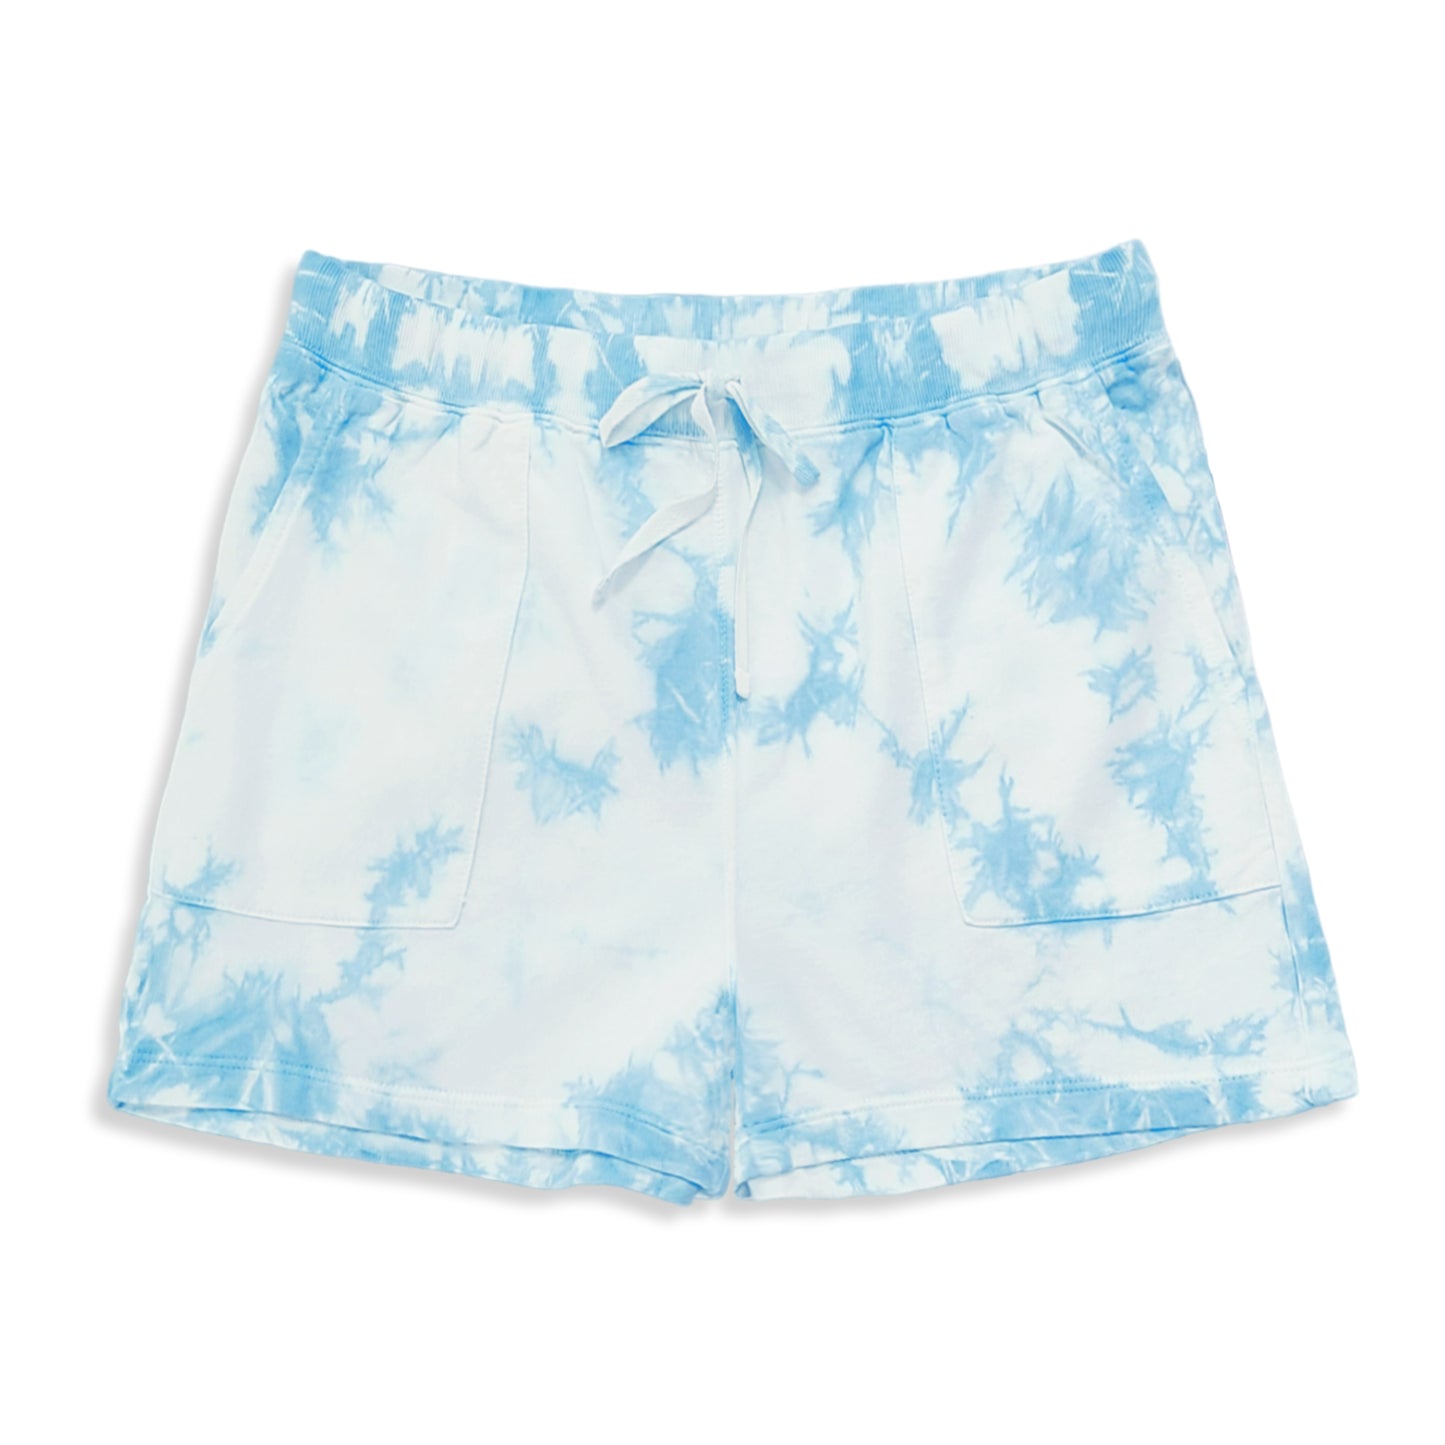 Lucky Brand Women's Tie Dye Print Side Pockets Soft Cotton Casual Shorts